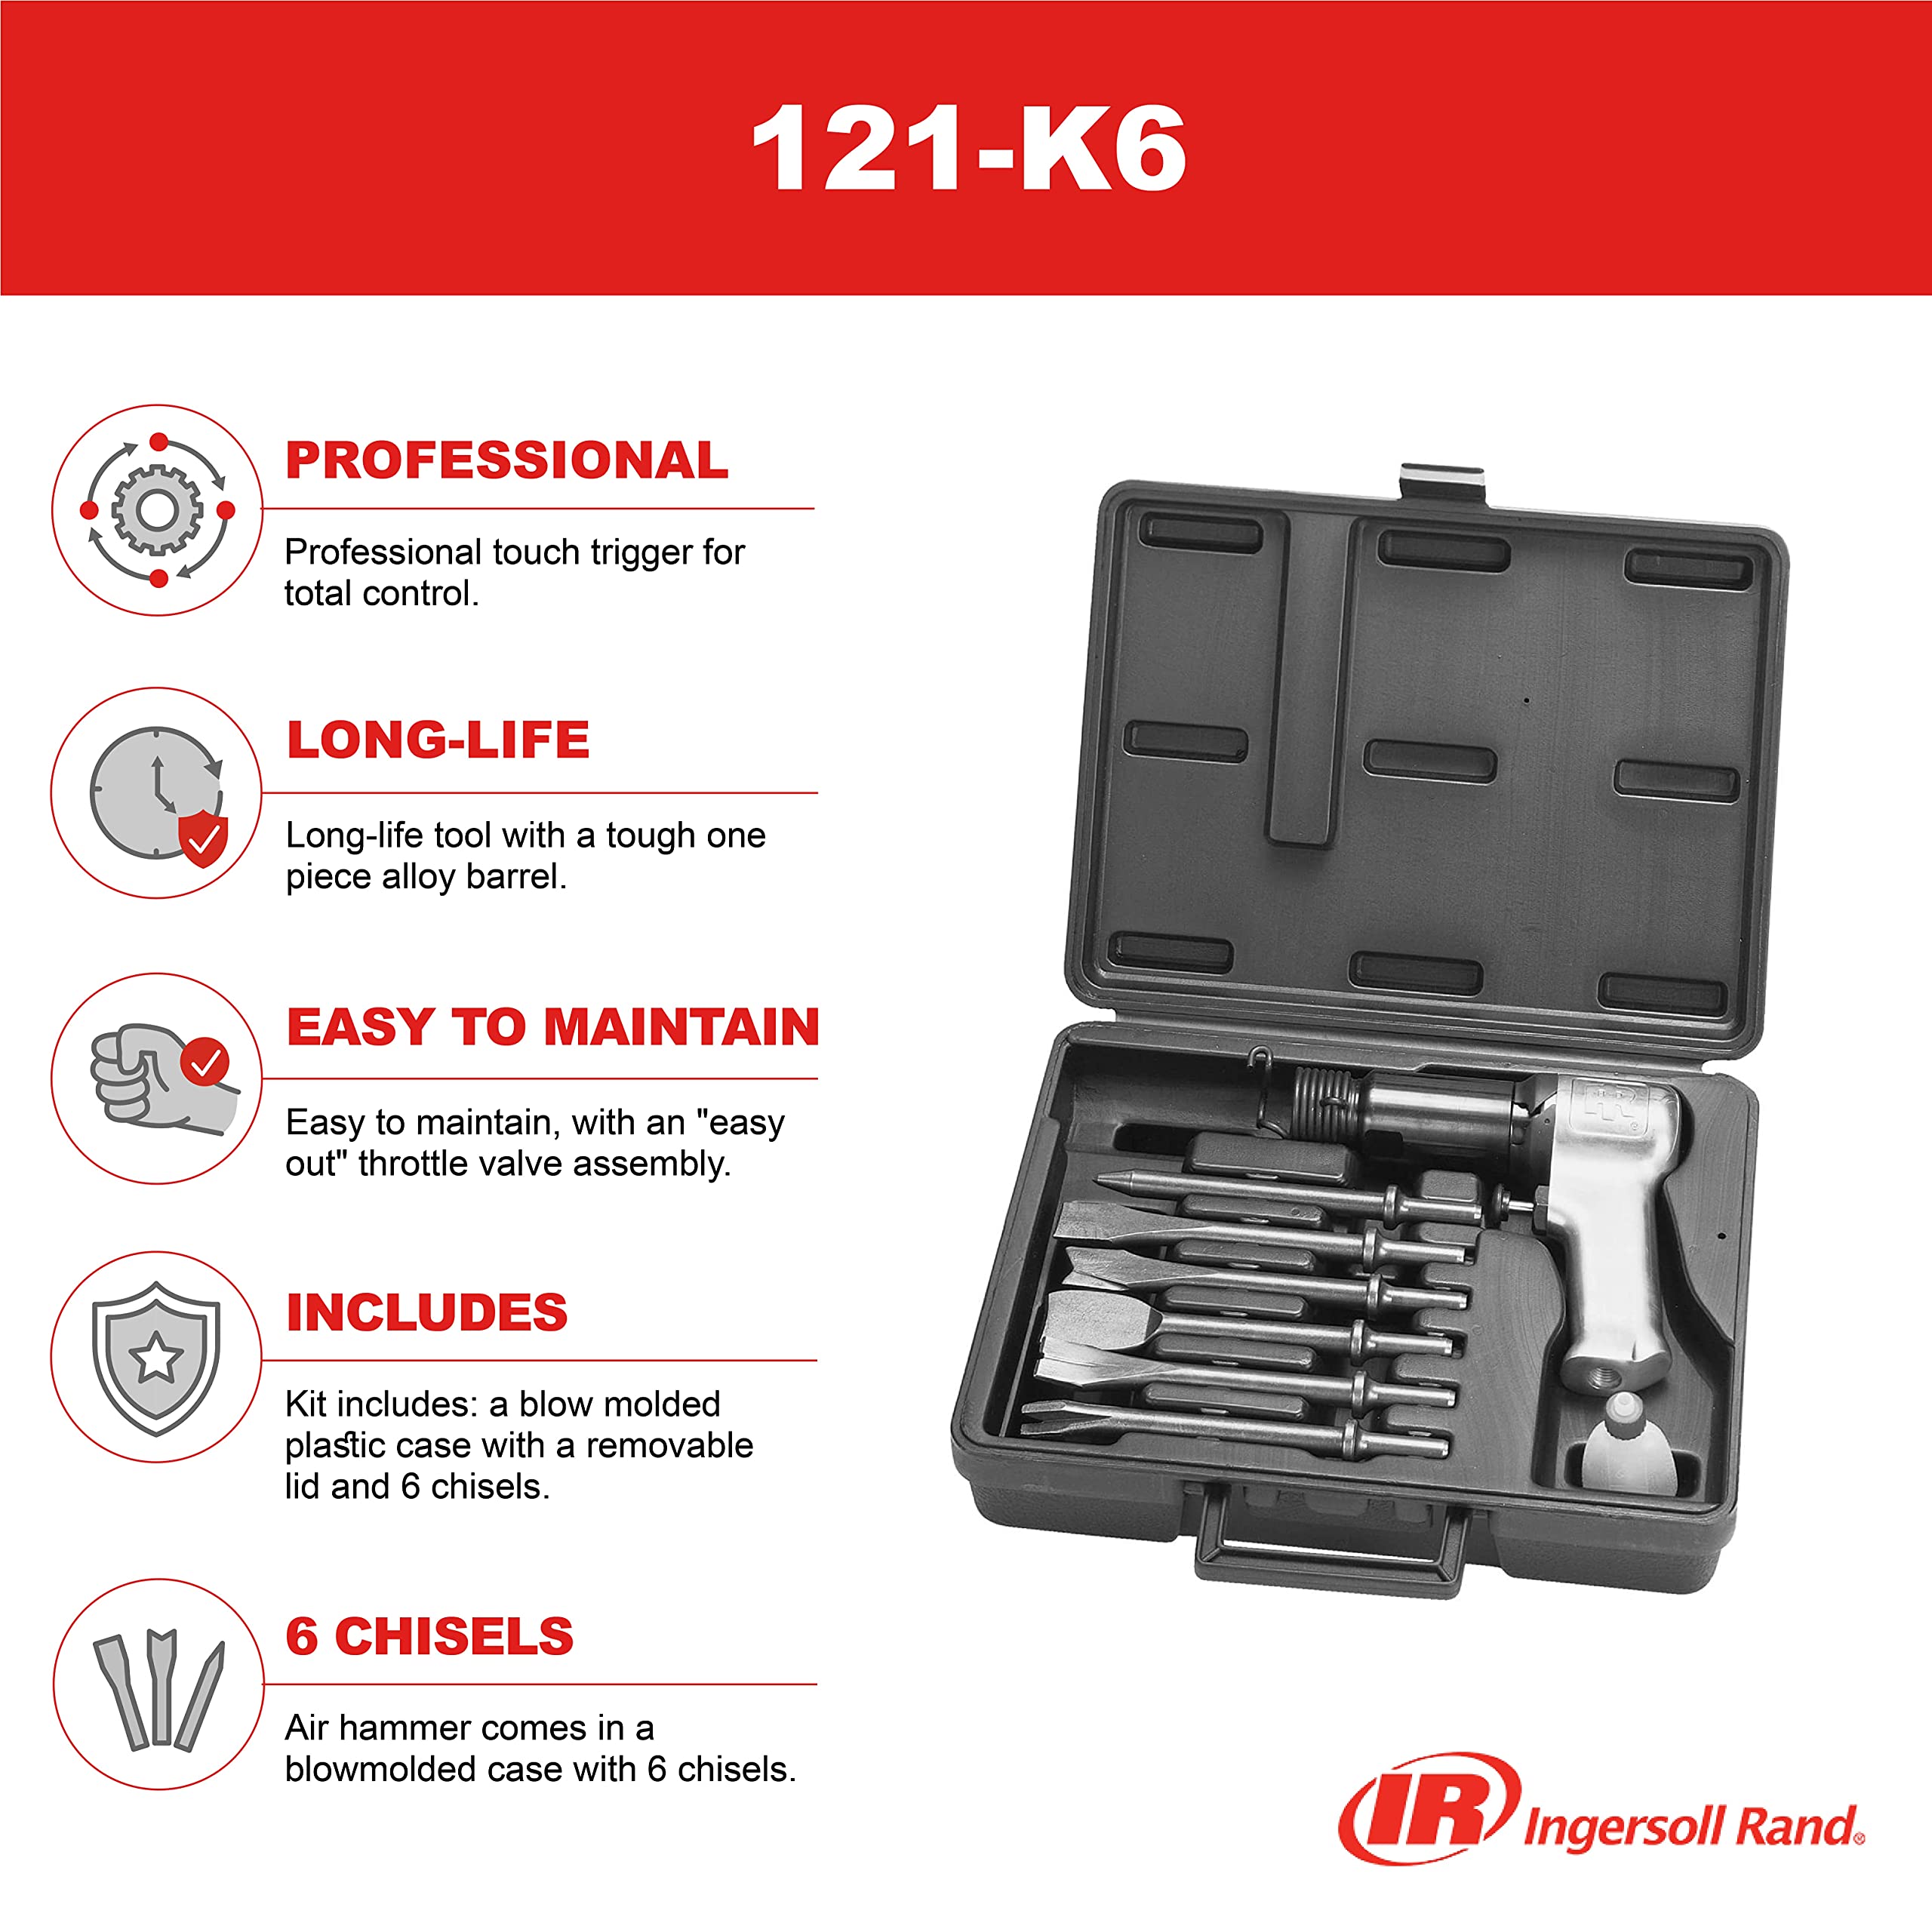 Ingersoll Rand 121-K6 Super Duty Air Hammer Kit, 121/Q Tool Plus 6 PC Chisel Set with Storage Case, Touch Trigger for Max Control, 3000 BPM